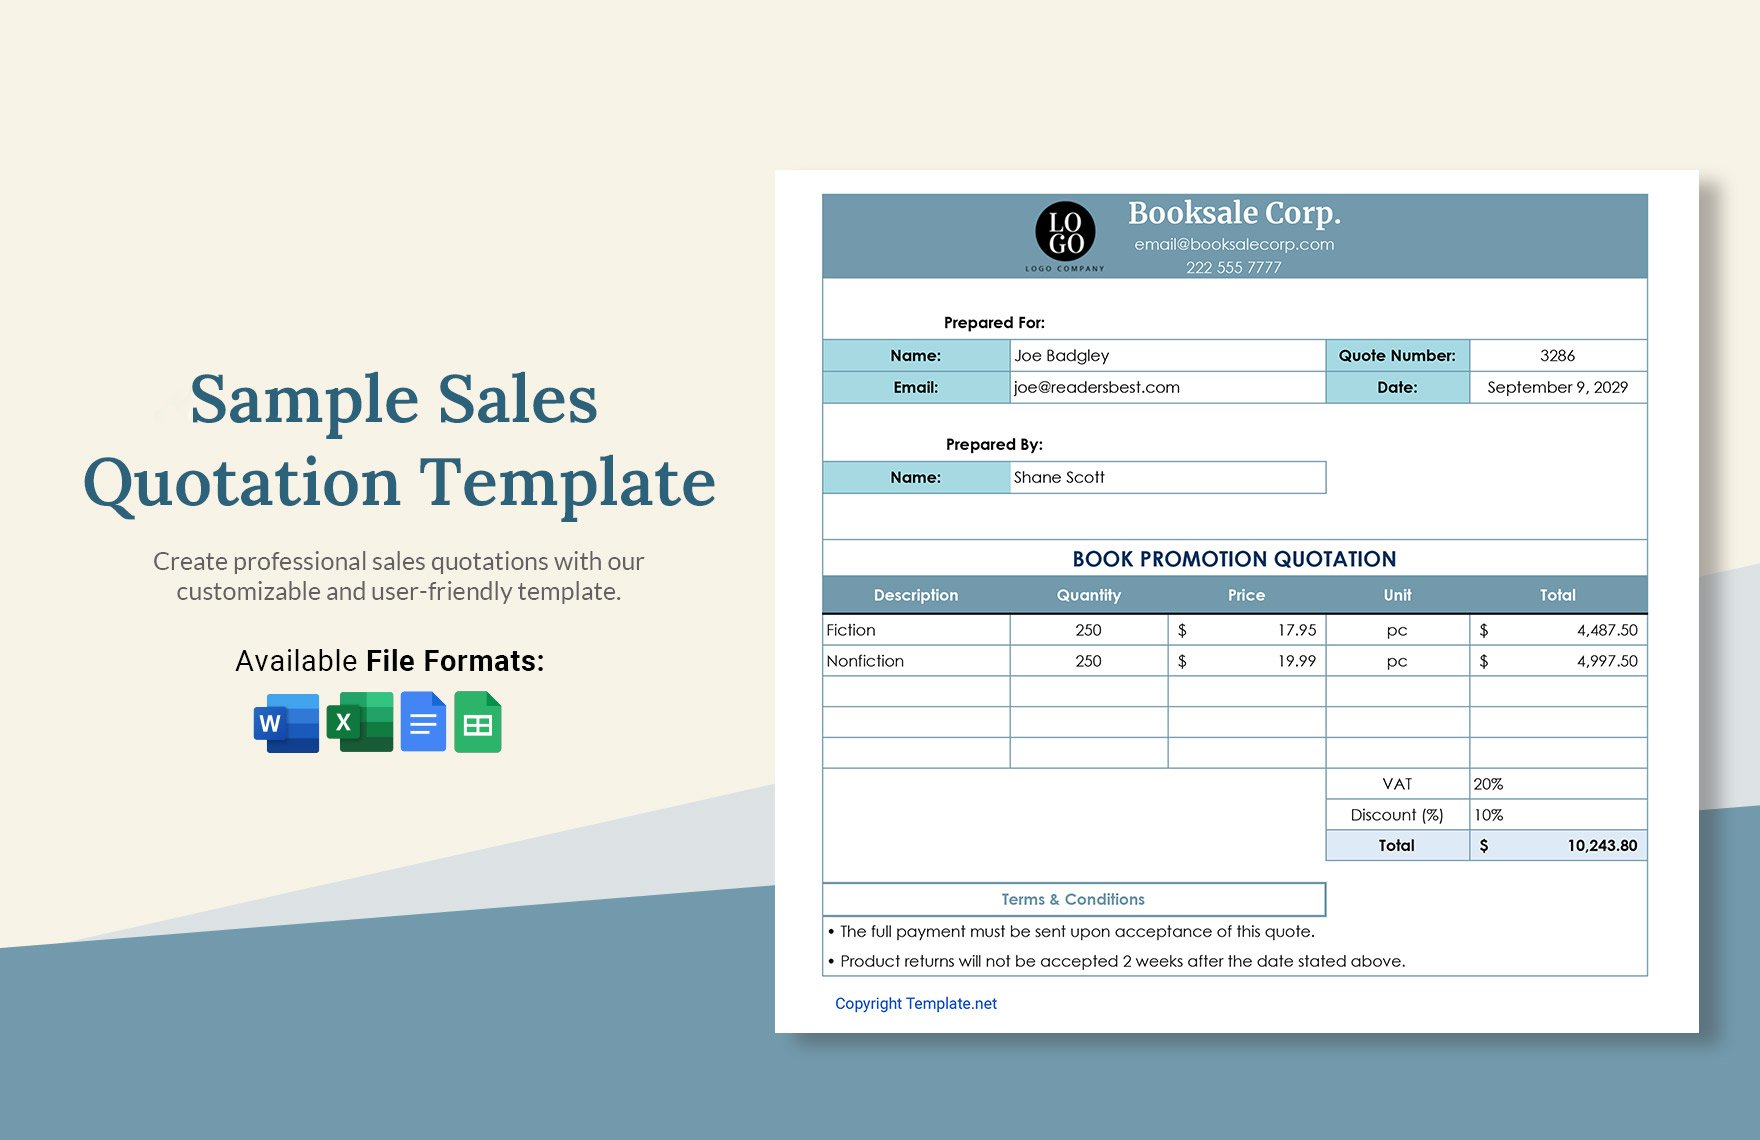 Sample Sales Quotation Template in Word, Google Docs, Excel, Google Sheets